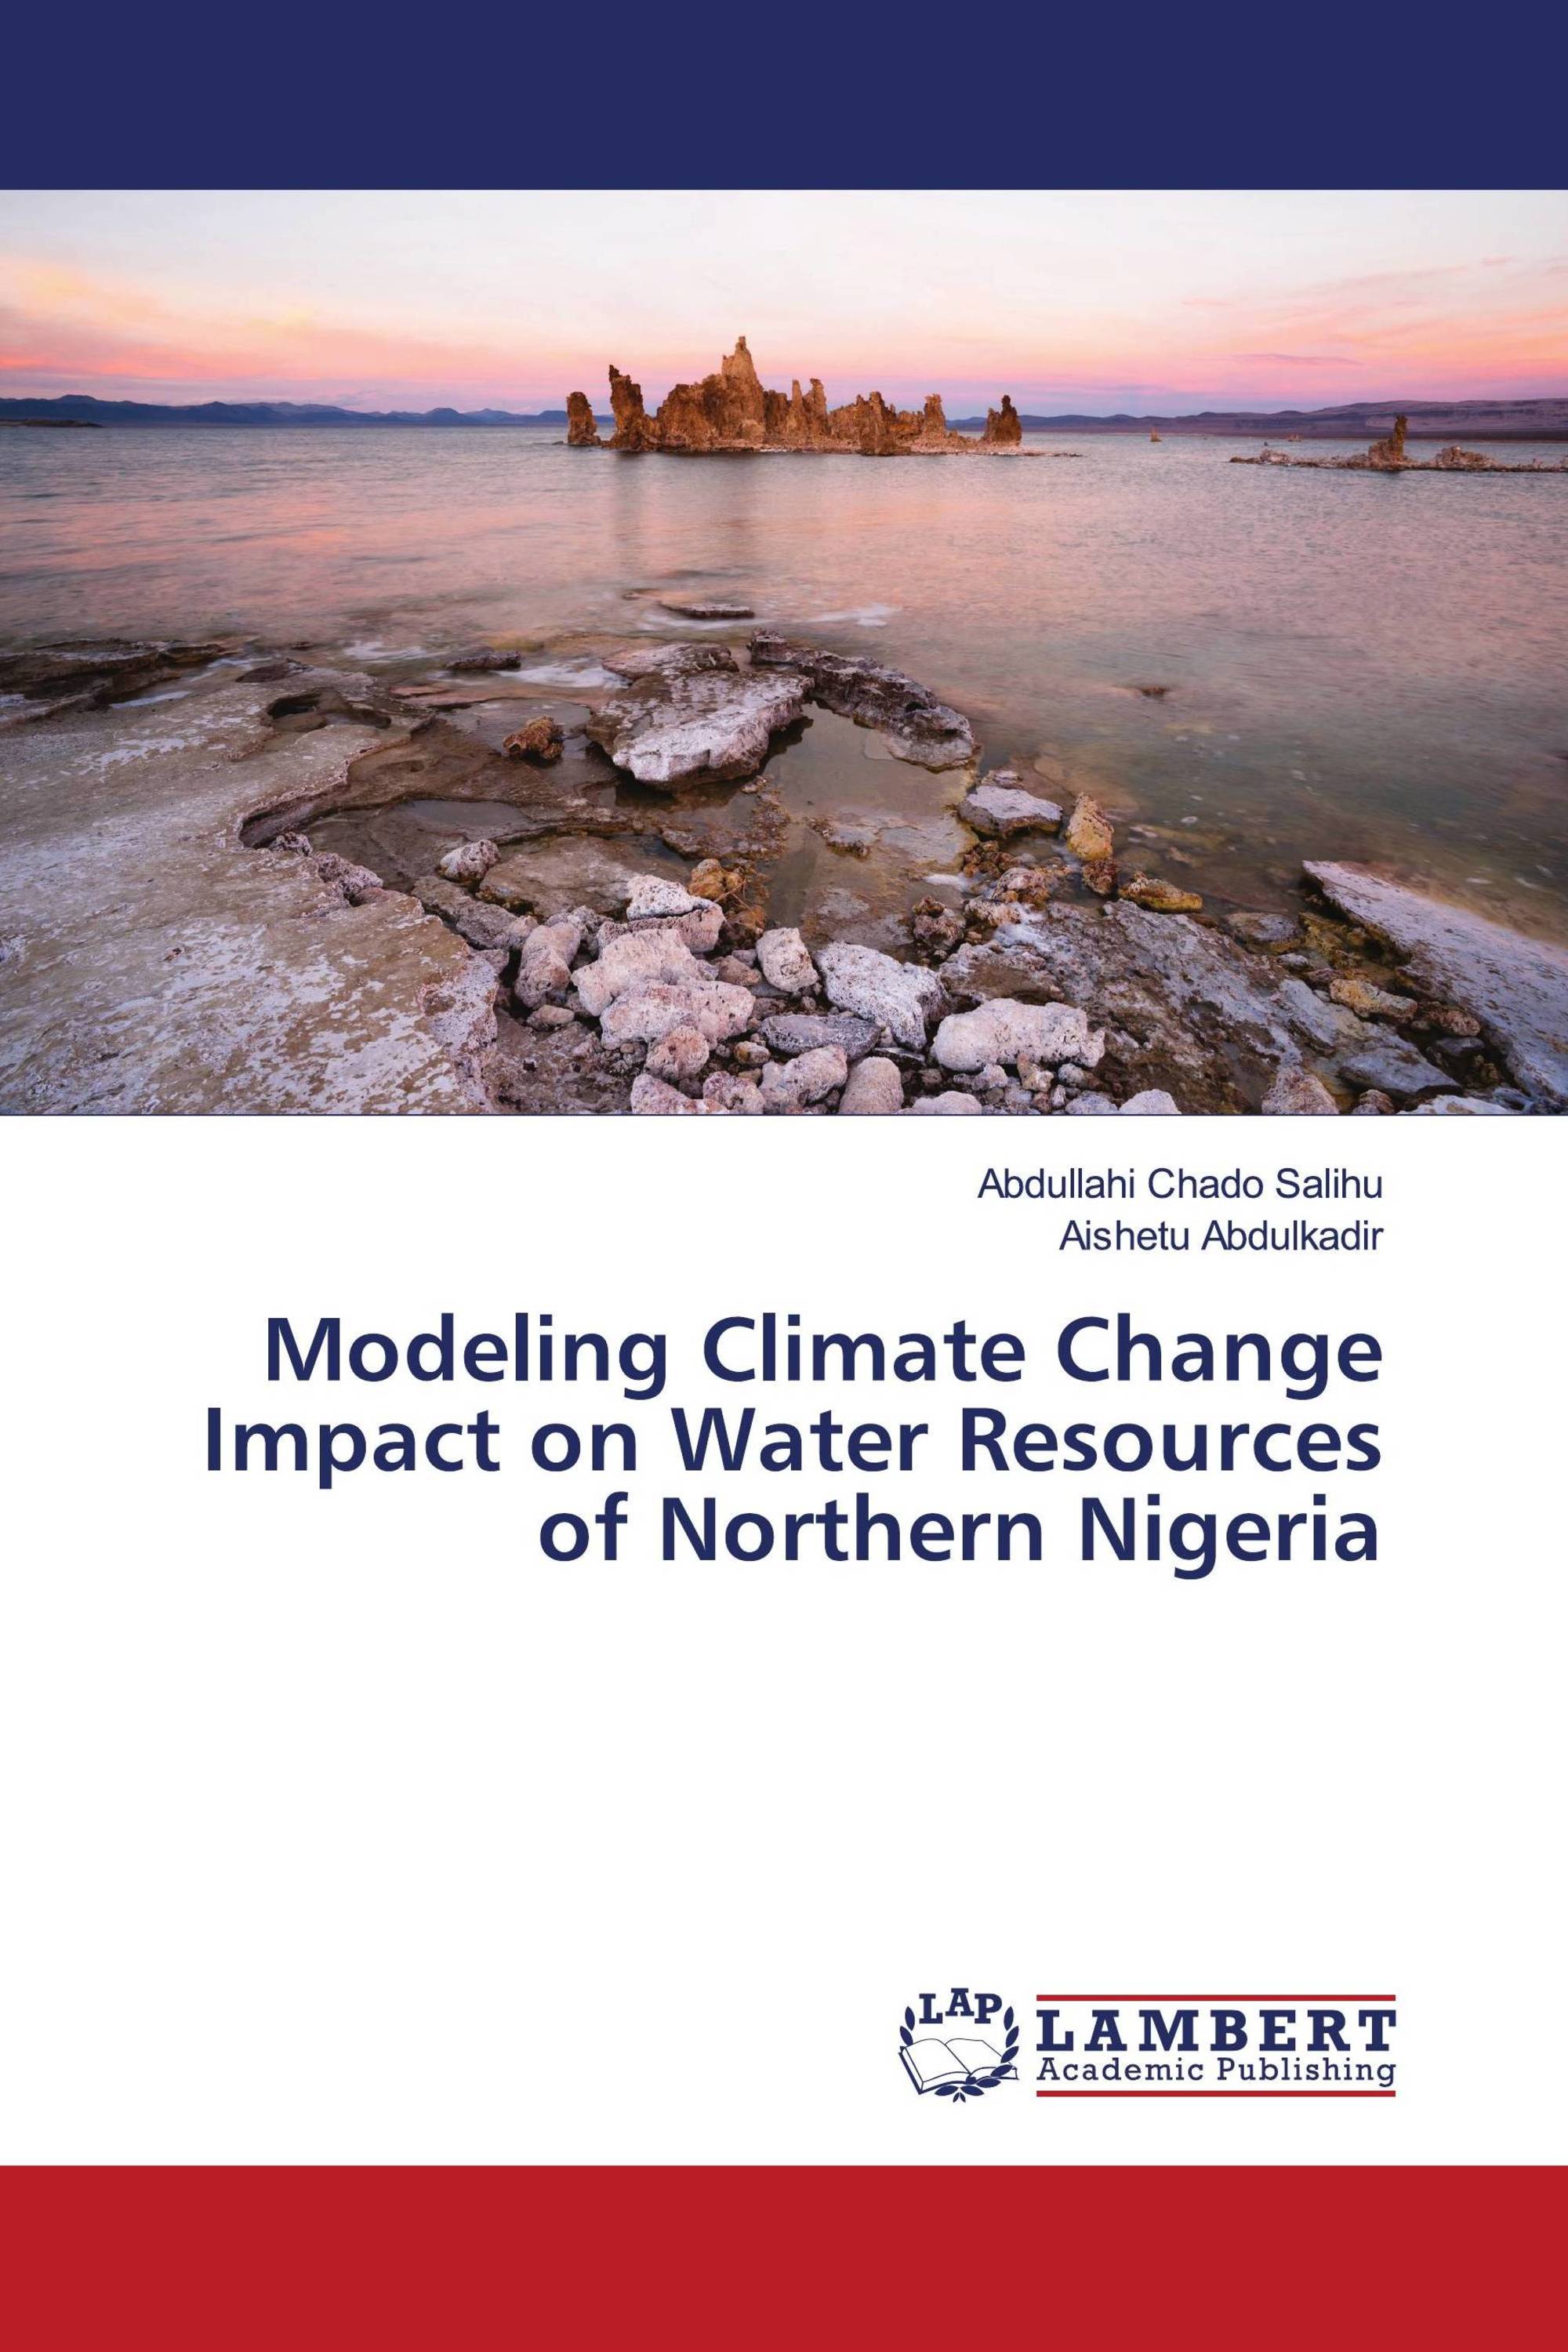 Modeling Climate Change Impact on Water Resources of Northern Nigeria